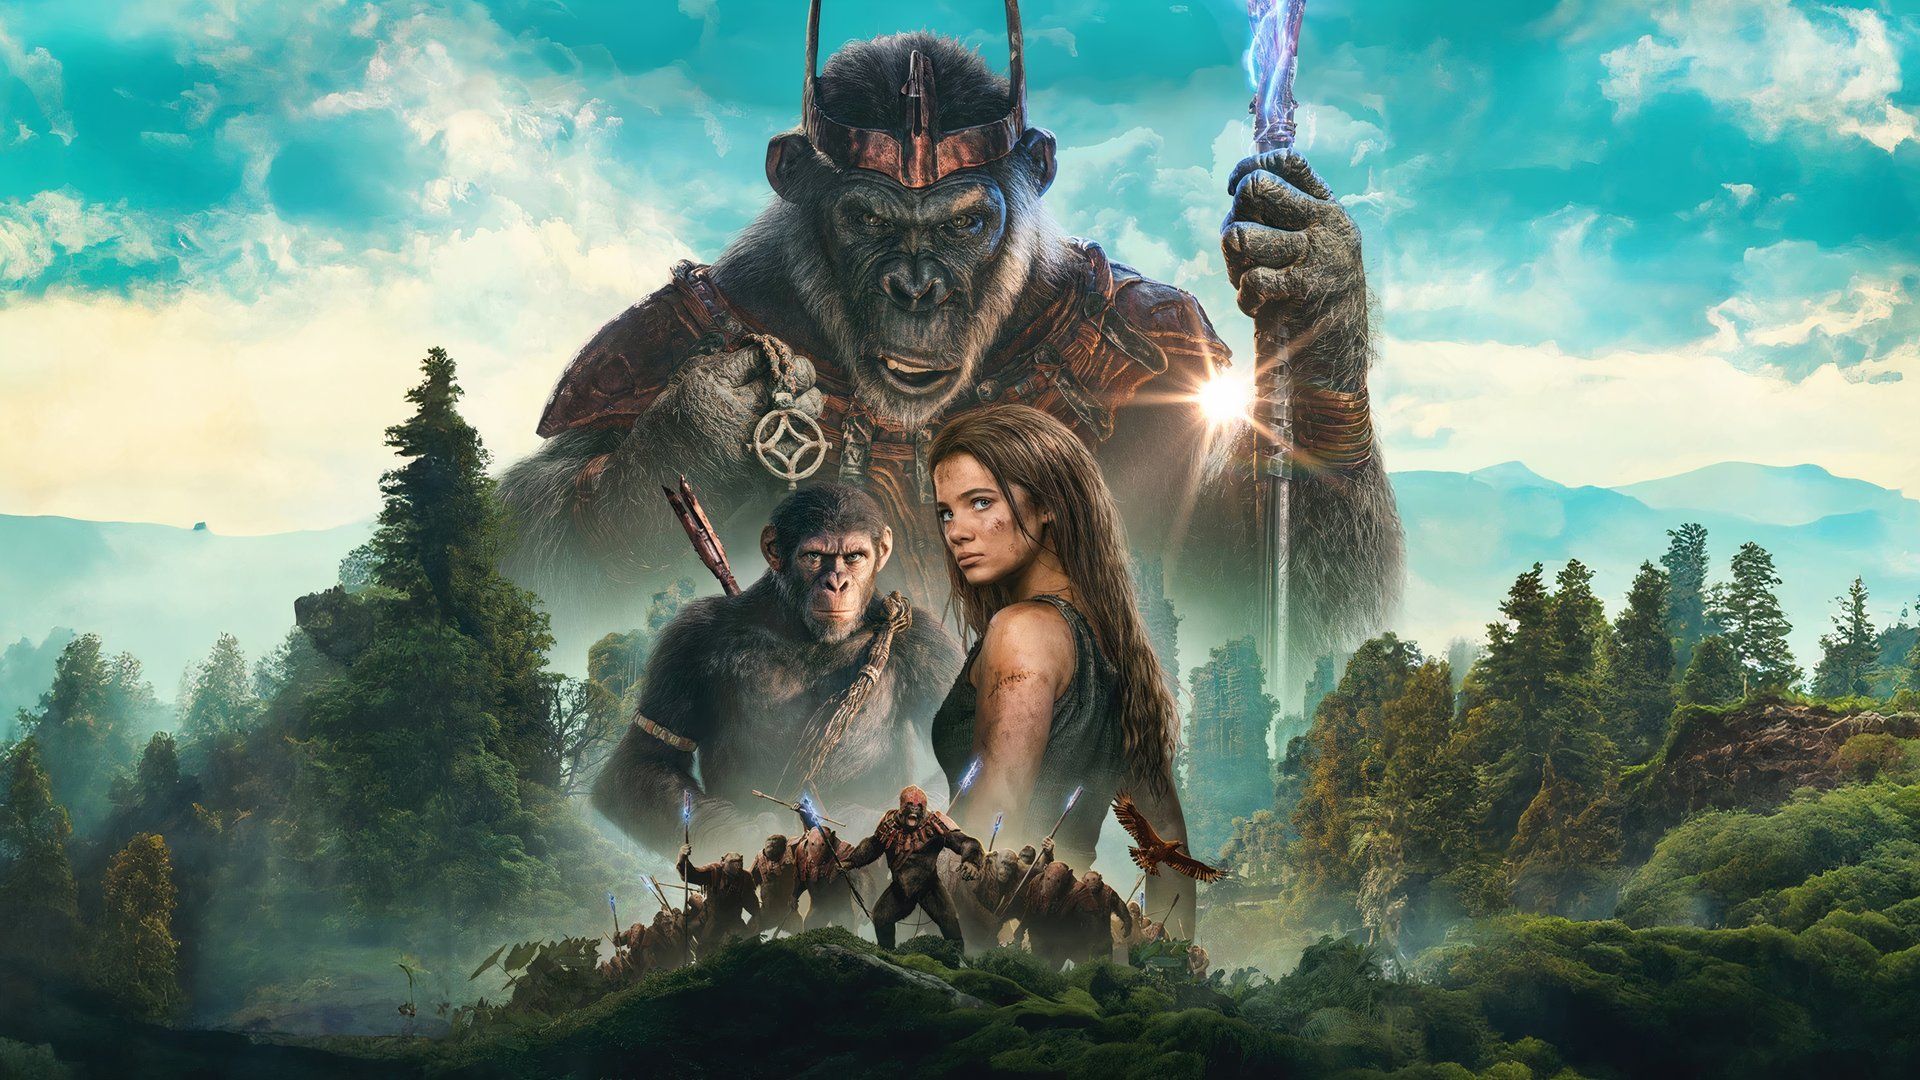 Planet of the Apes 9-Movie Saga Now Planned, Kingdom Box Office Bodes Well for Sequels